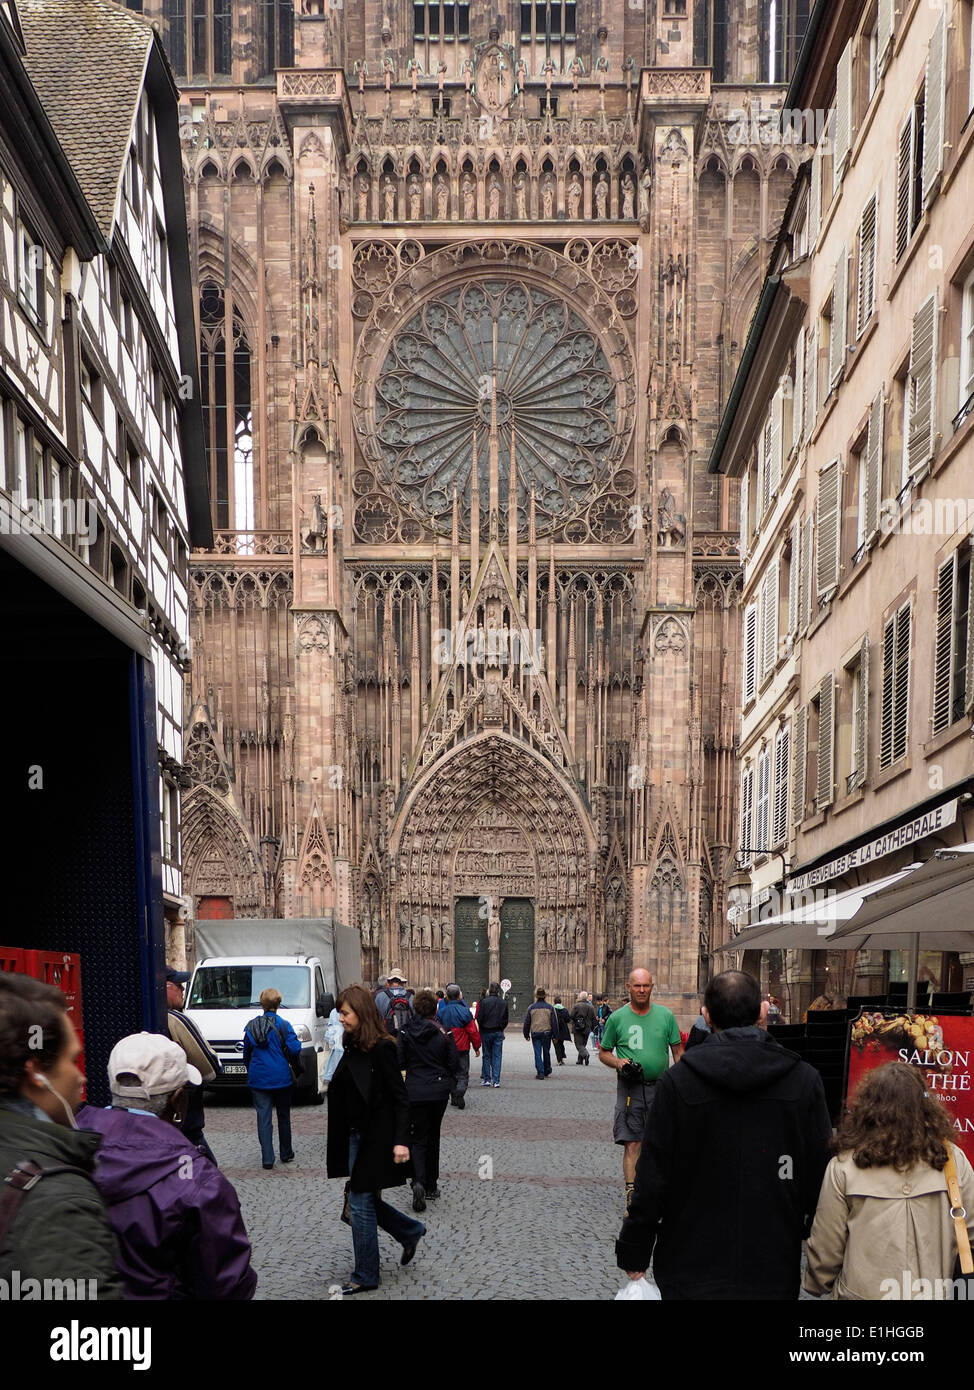 Street Scene Strasbourg France with Notre Dame Cathedral Stock Photo